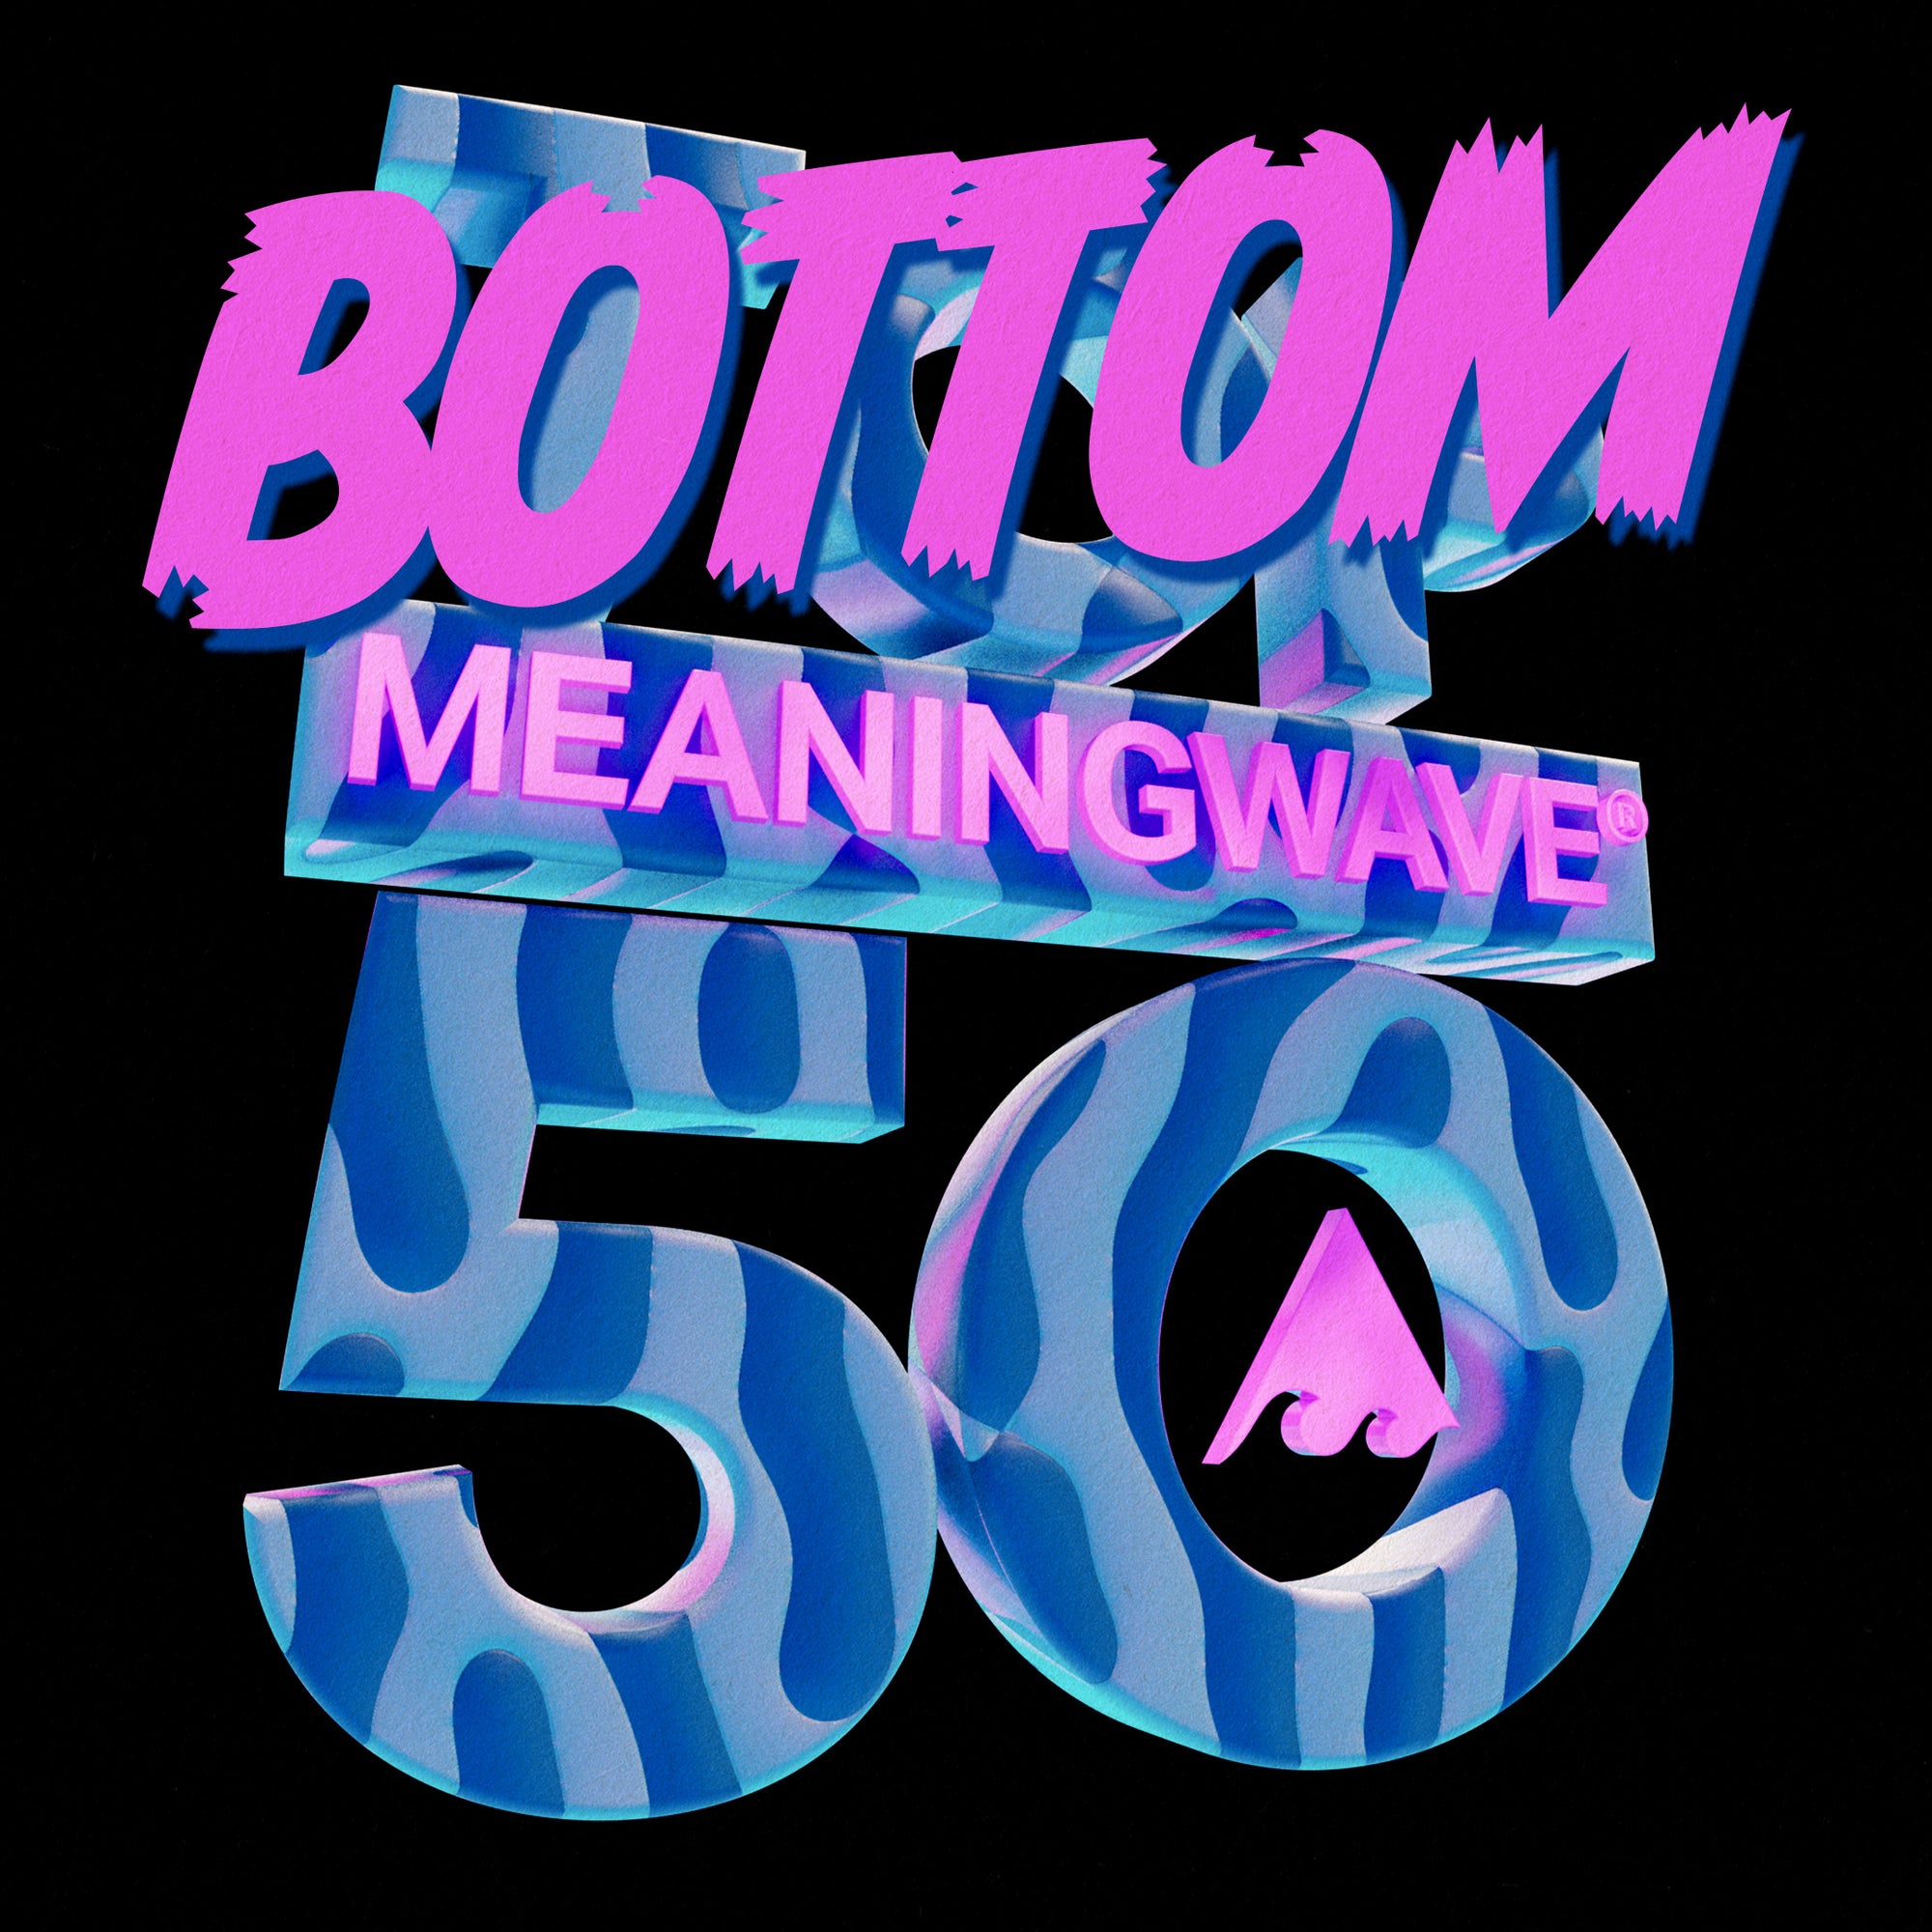 THE MEANINGWAVE BOTTOM 50! What’s the LEAST STREAMED song?!